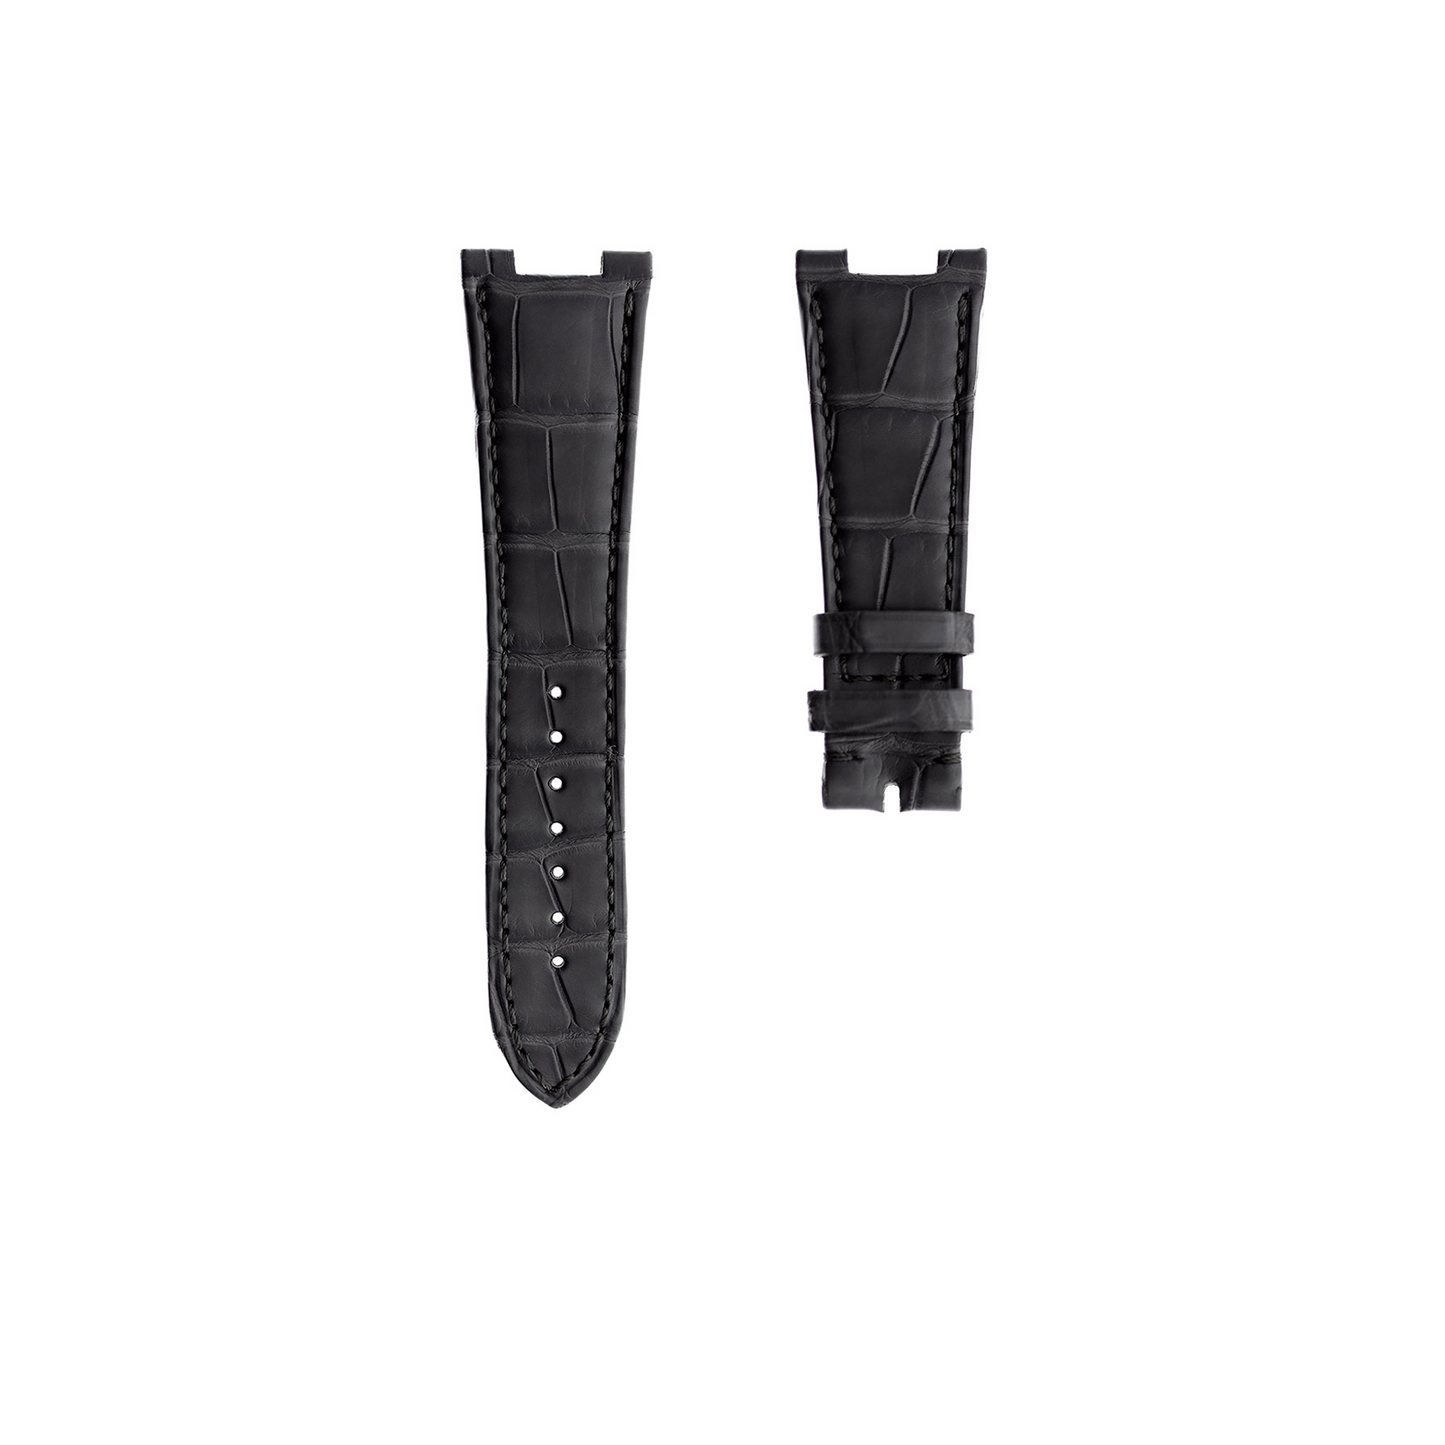 DBLACK [PKPEDS1] 25MM CROCO DESIGN, LEATHER WATCH STRAP (BLACK CROCO) // PERFECT FOR "PATEK PHILIPPE" WATCHES